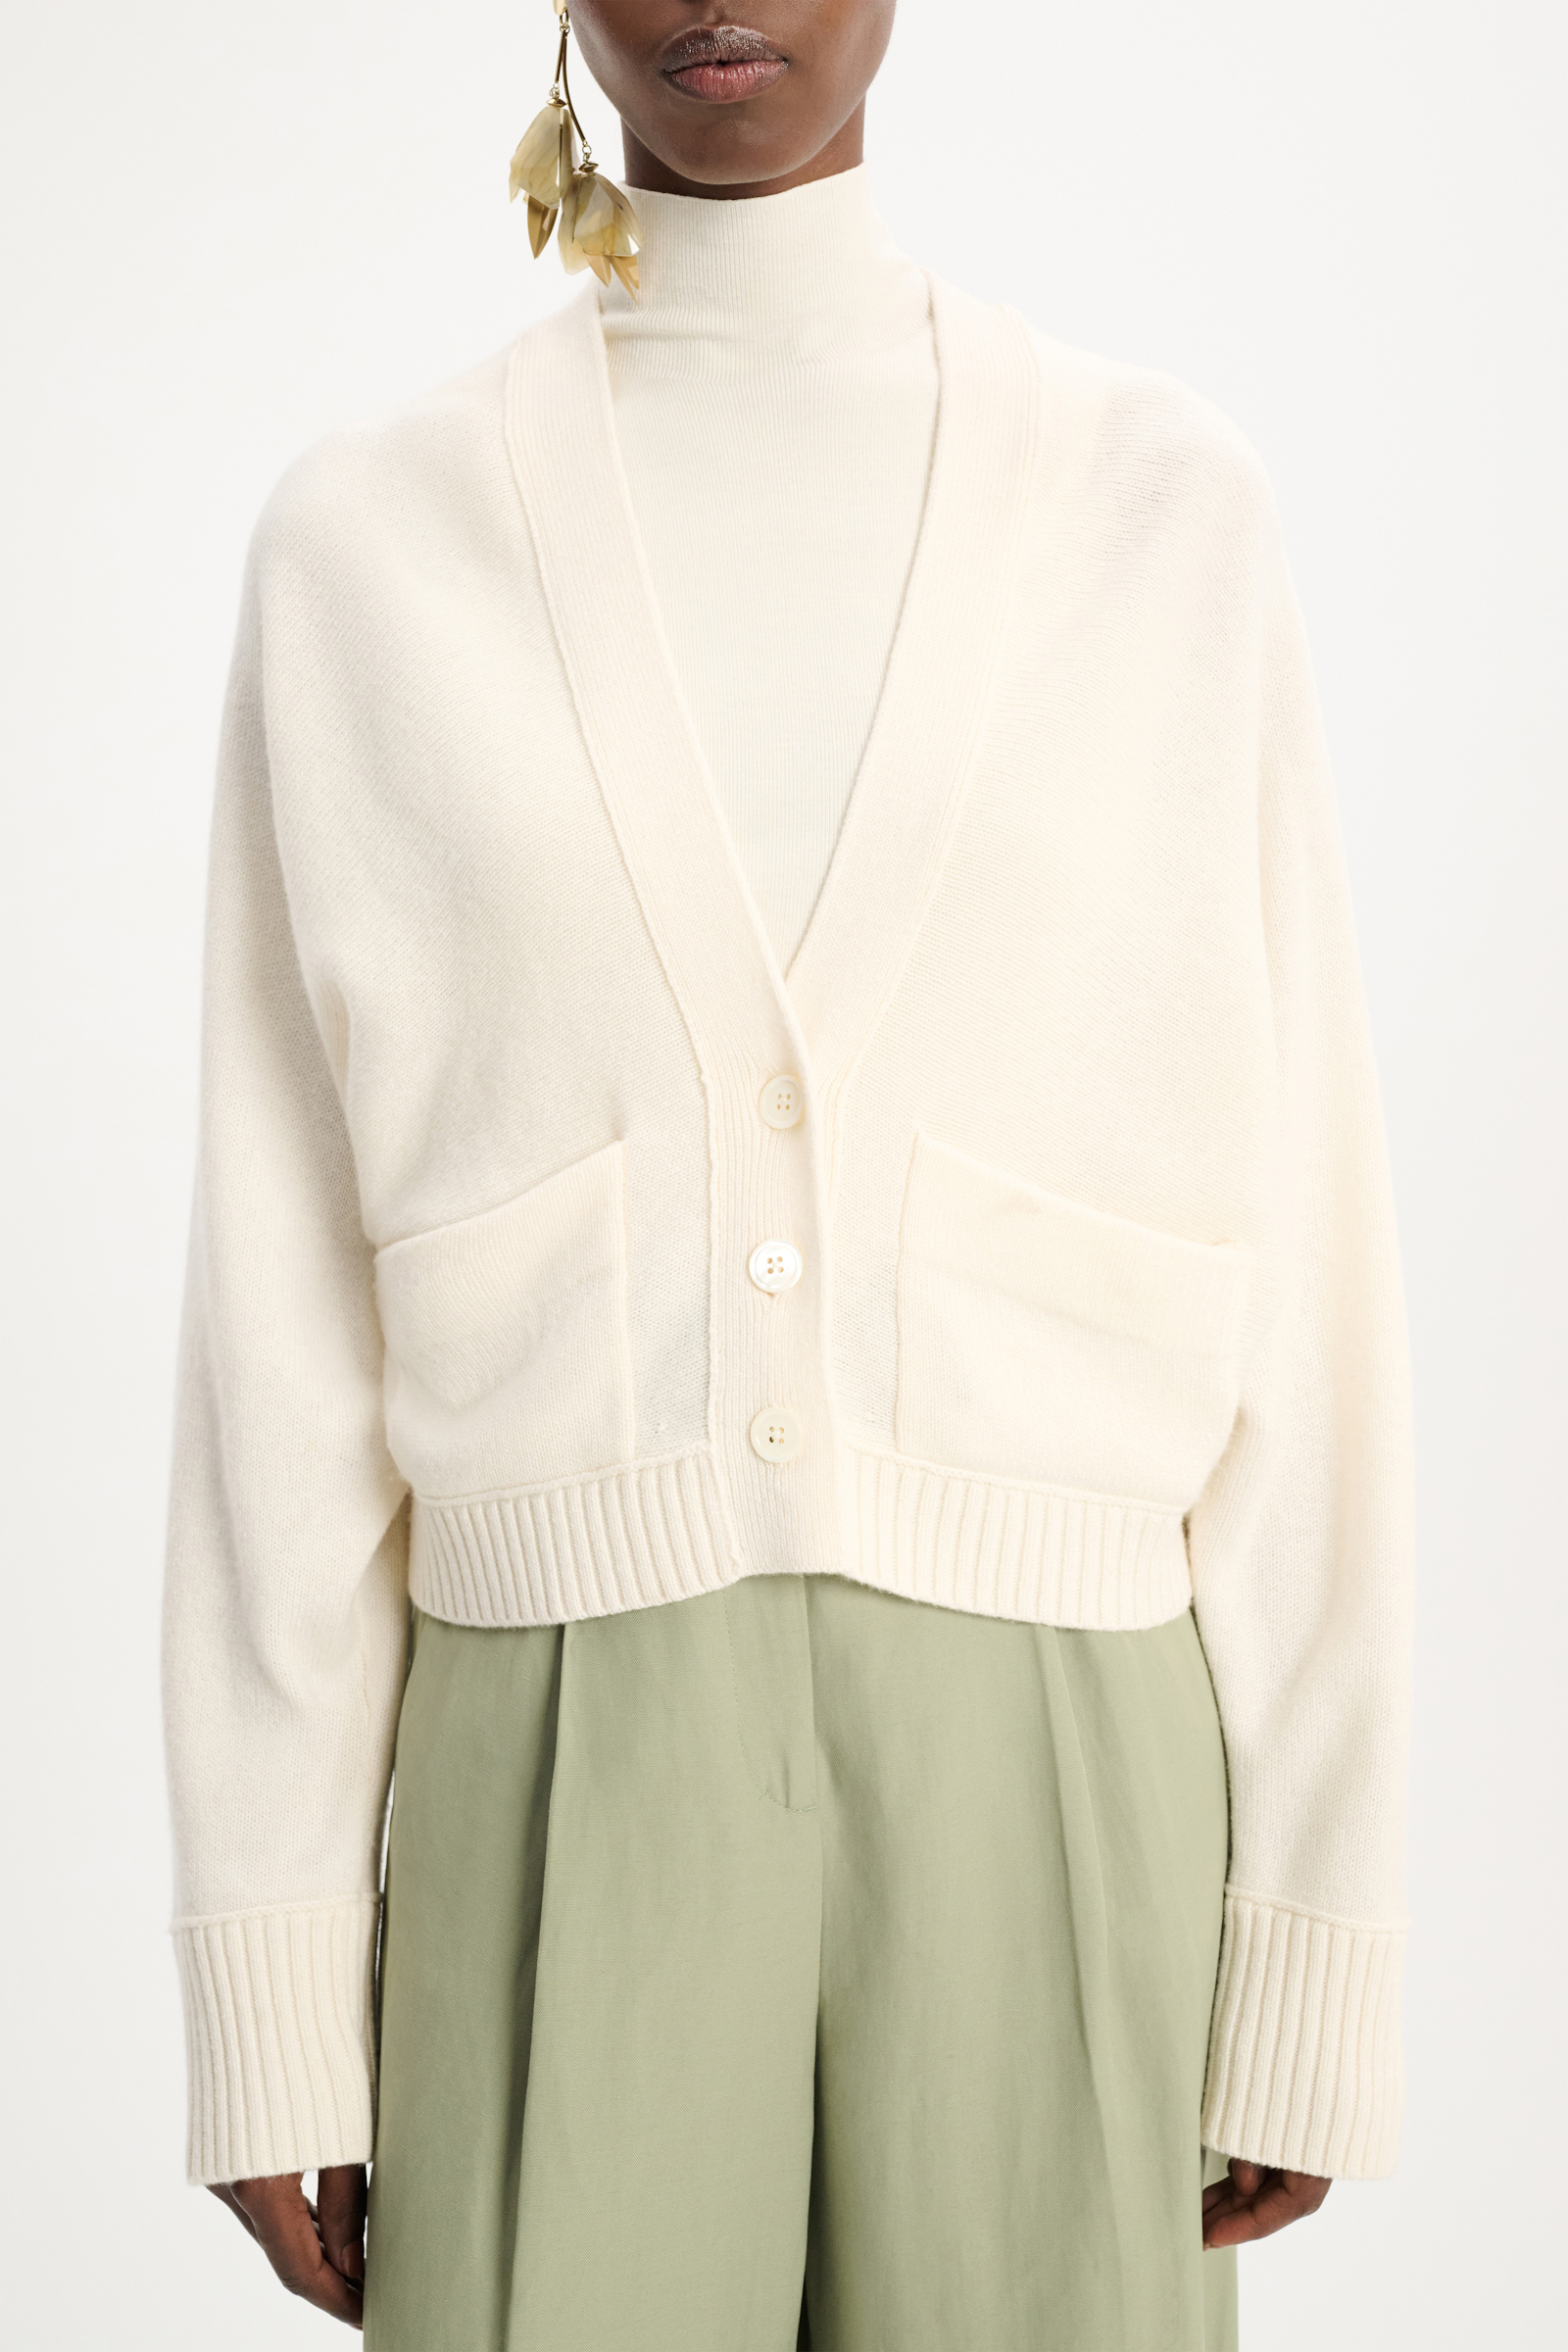 Dorothee Schumacher Wool-cashmere V-neck cardigan with pockets camellia white